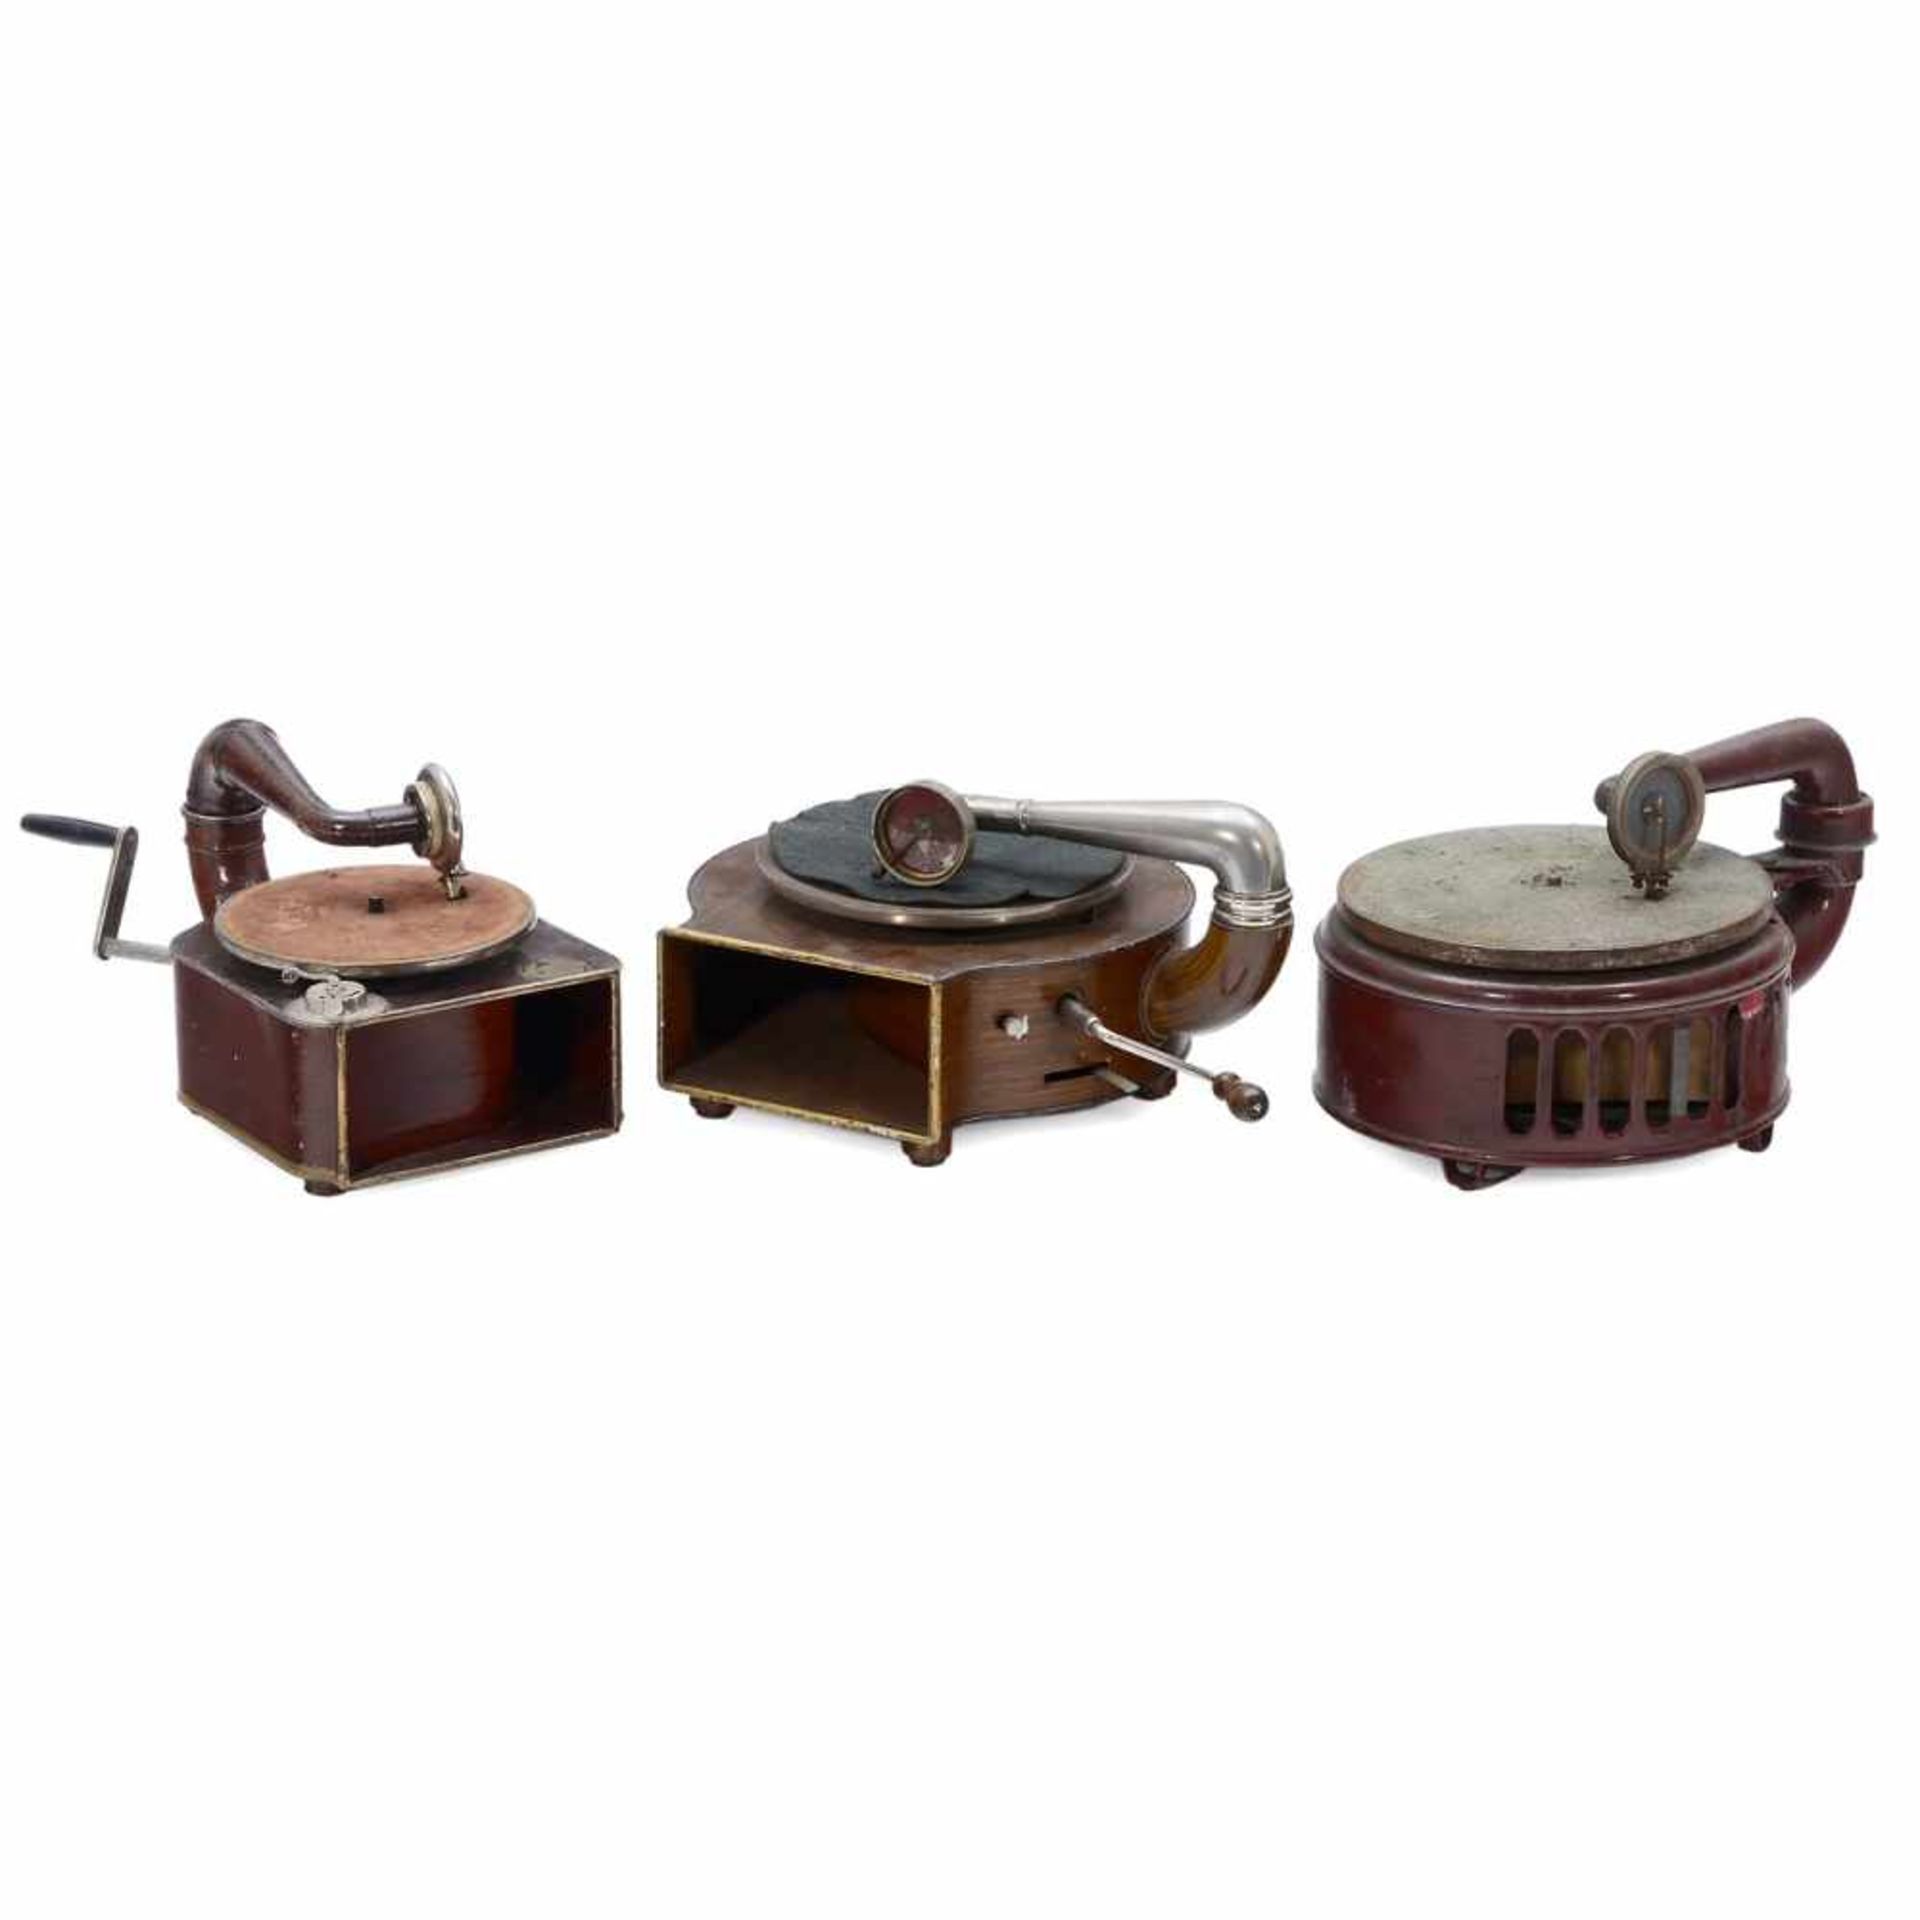 3 Gramophones with Grained Metal Cases, c. 19351) Seil & Voss, Berlin, the motor runs unsmothly